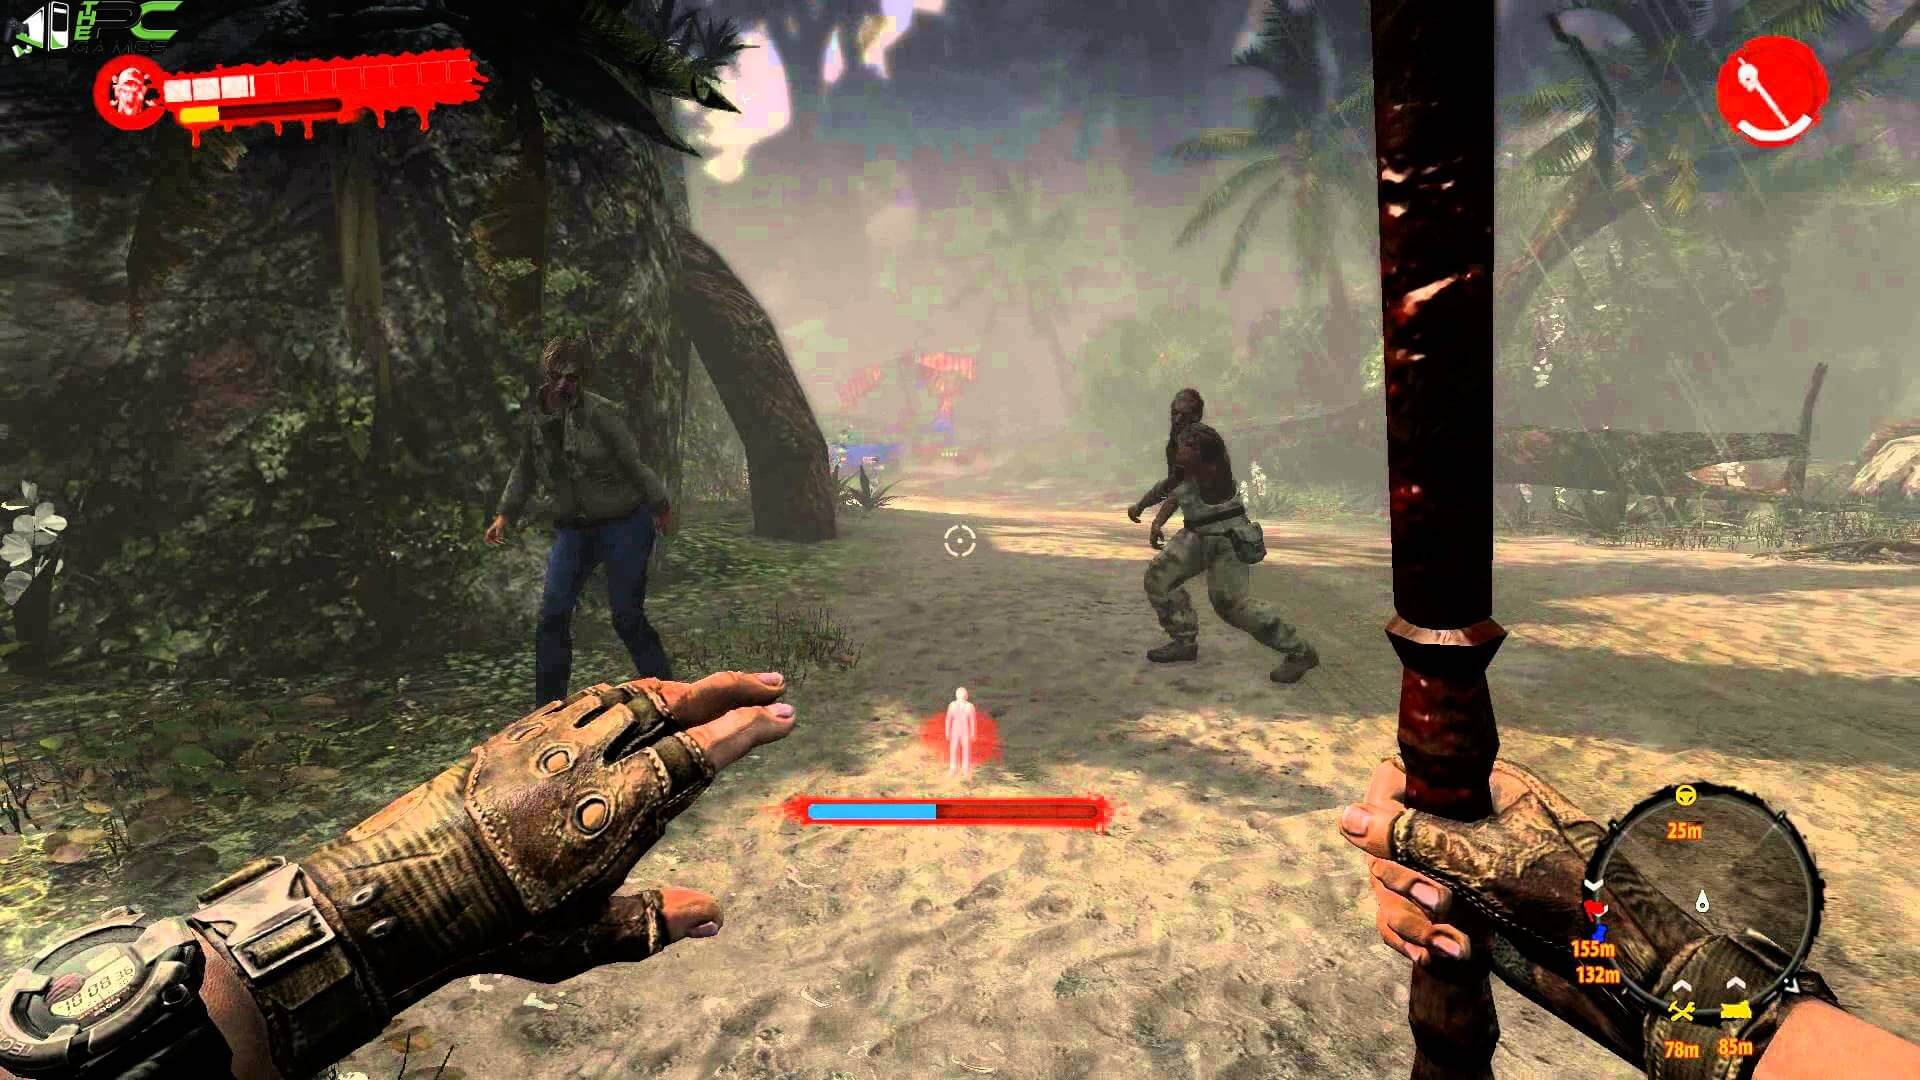 Dead island download for pc highly compressed